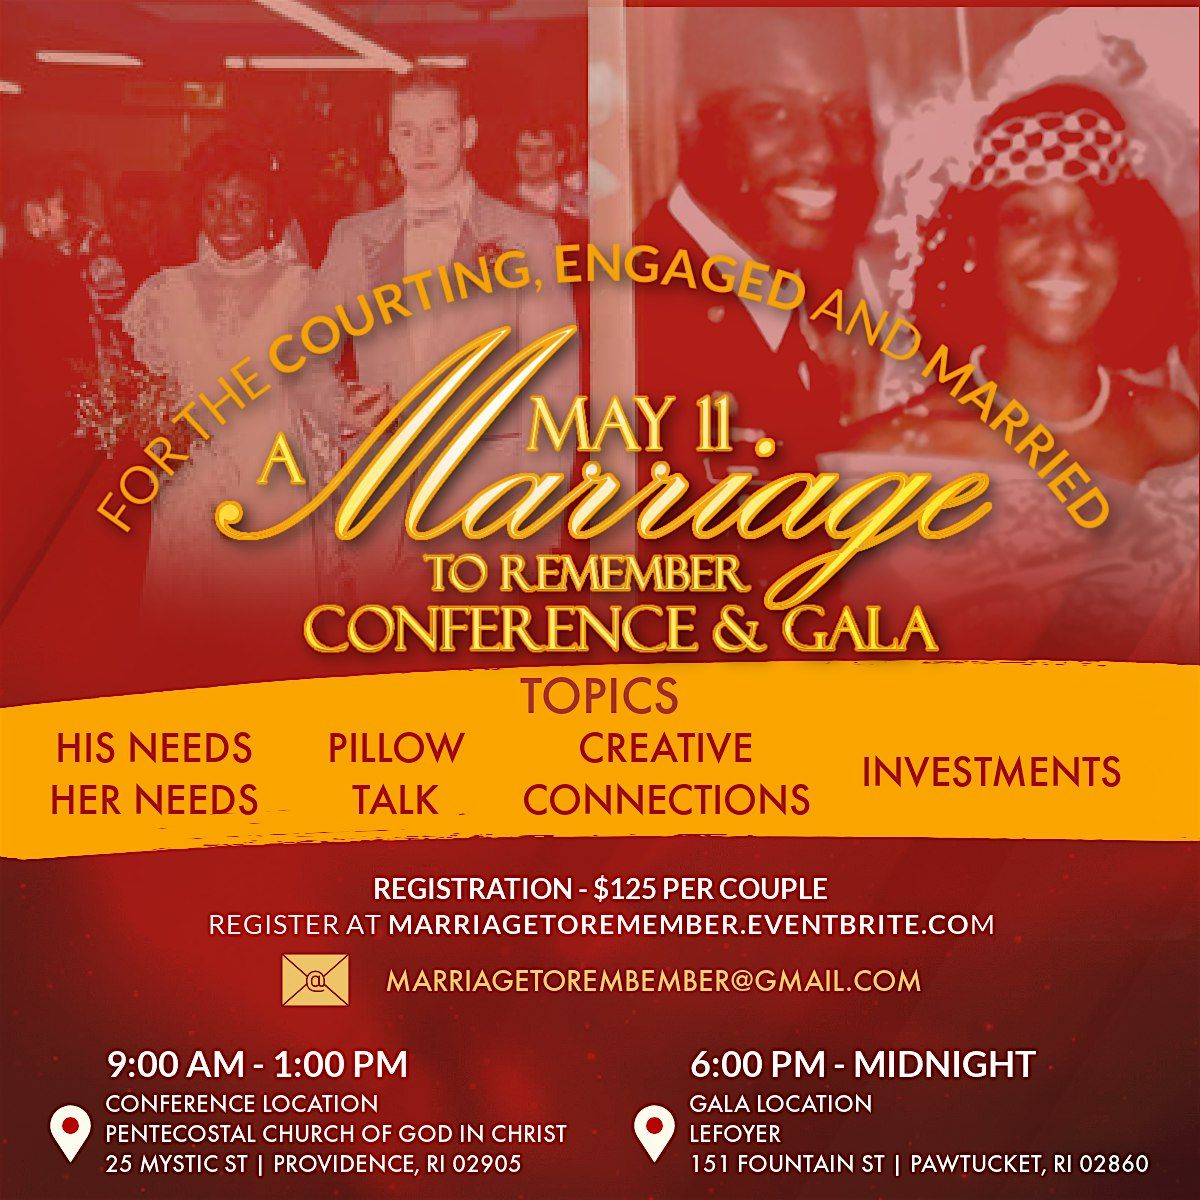 "A Marriage to Remember Conference & Gala"